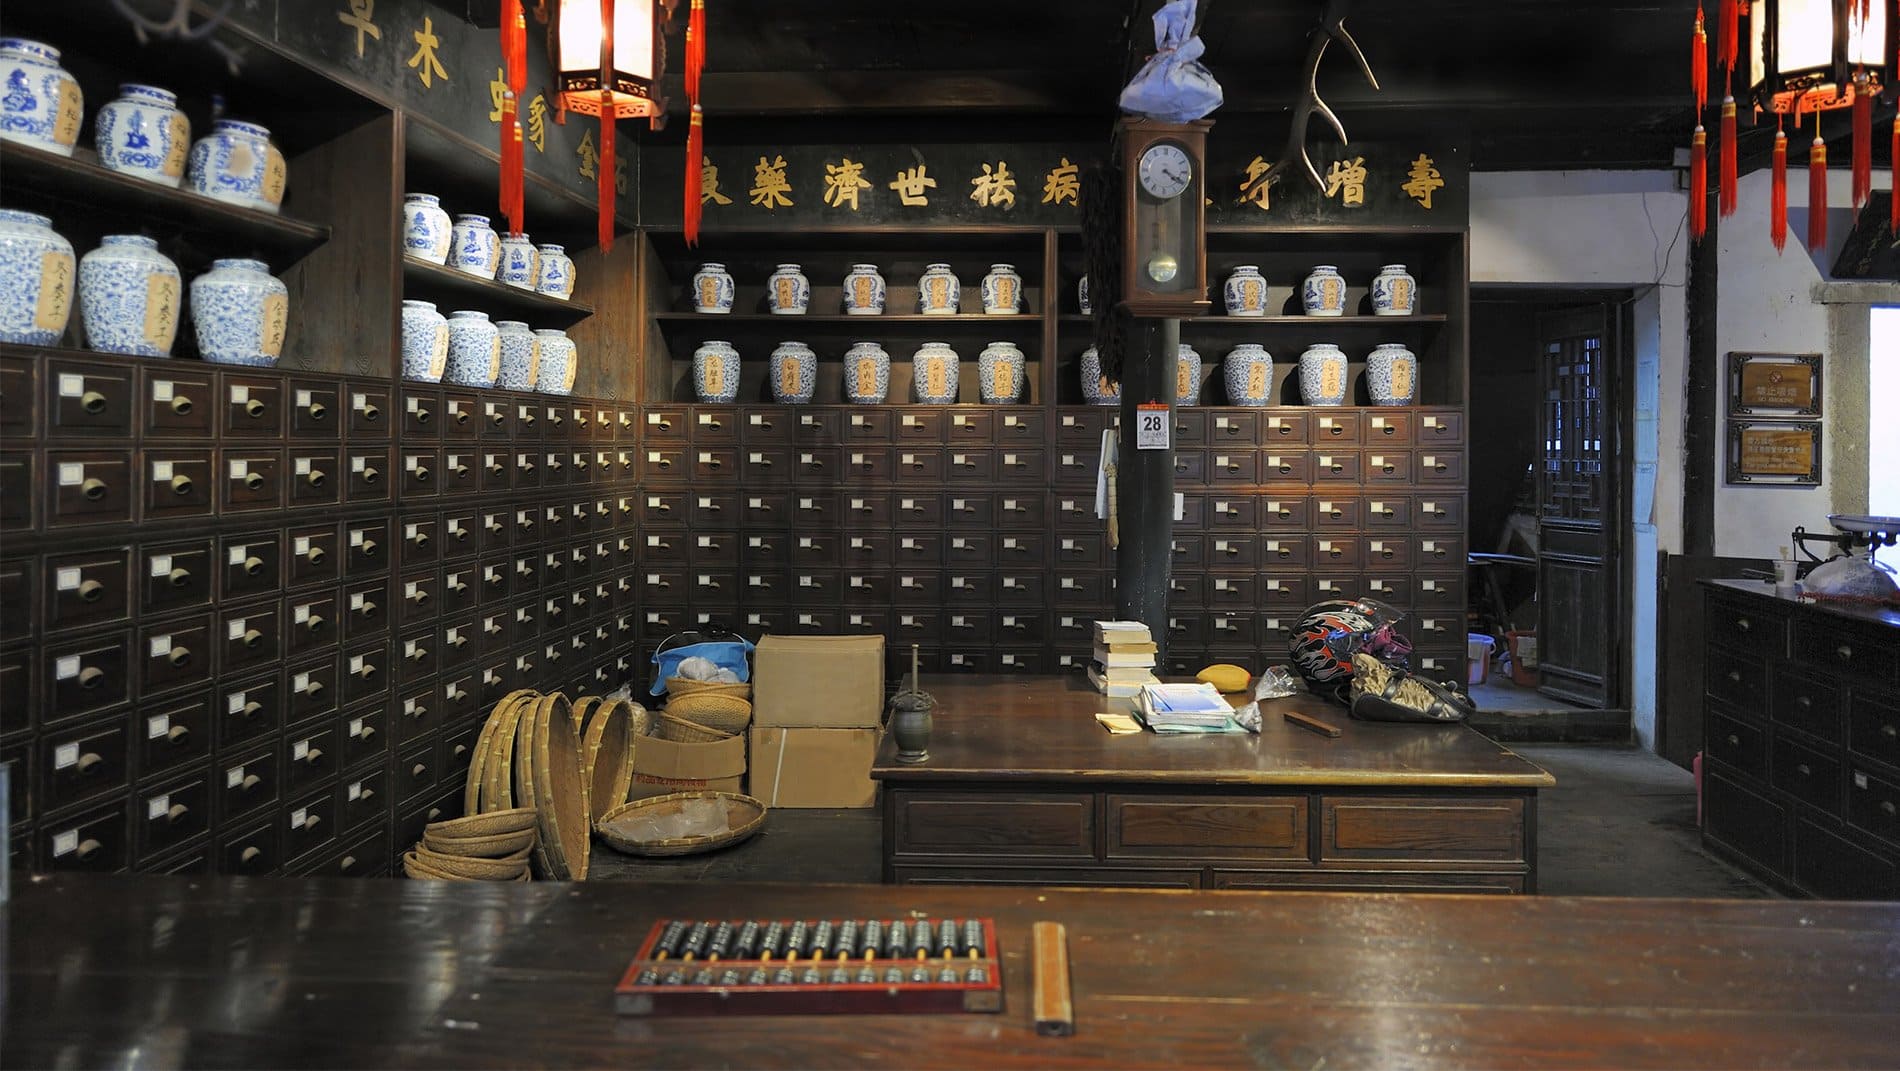 Traditional Chinese Pharmacy~From acupuncture to a recent Nobel-prize winning cure for malaria, traditional Chinese medicine contains much wisdom. Learn about its day to day application in this beautiful, ancient pharmacy.